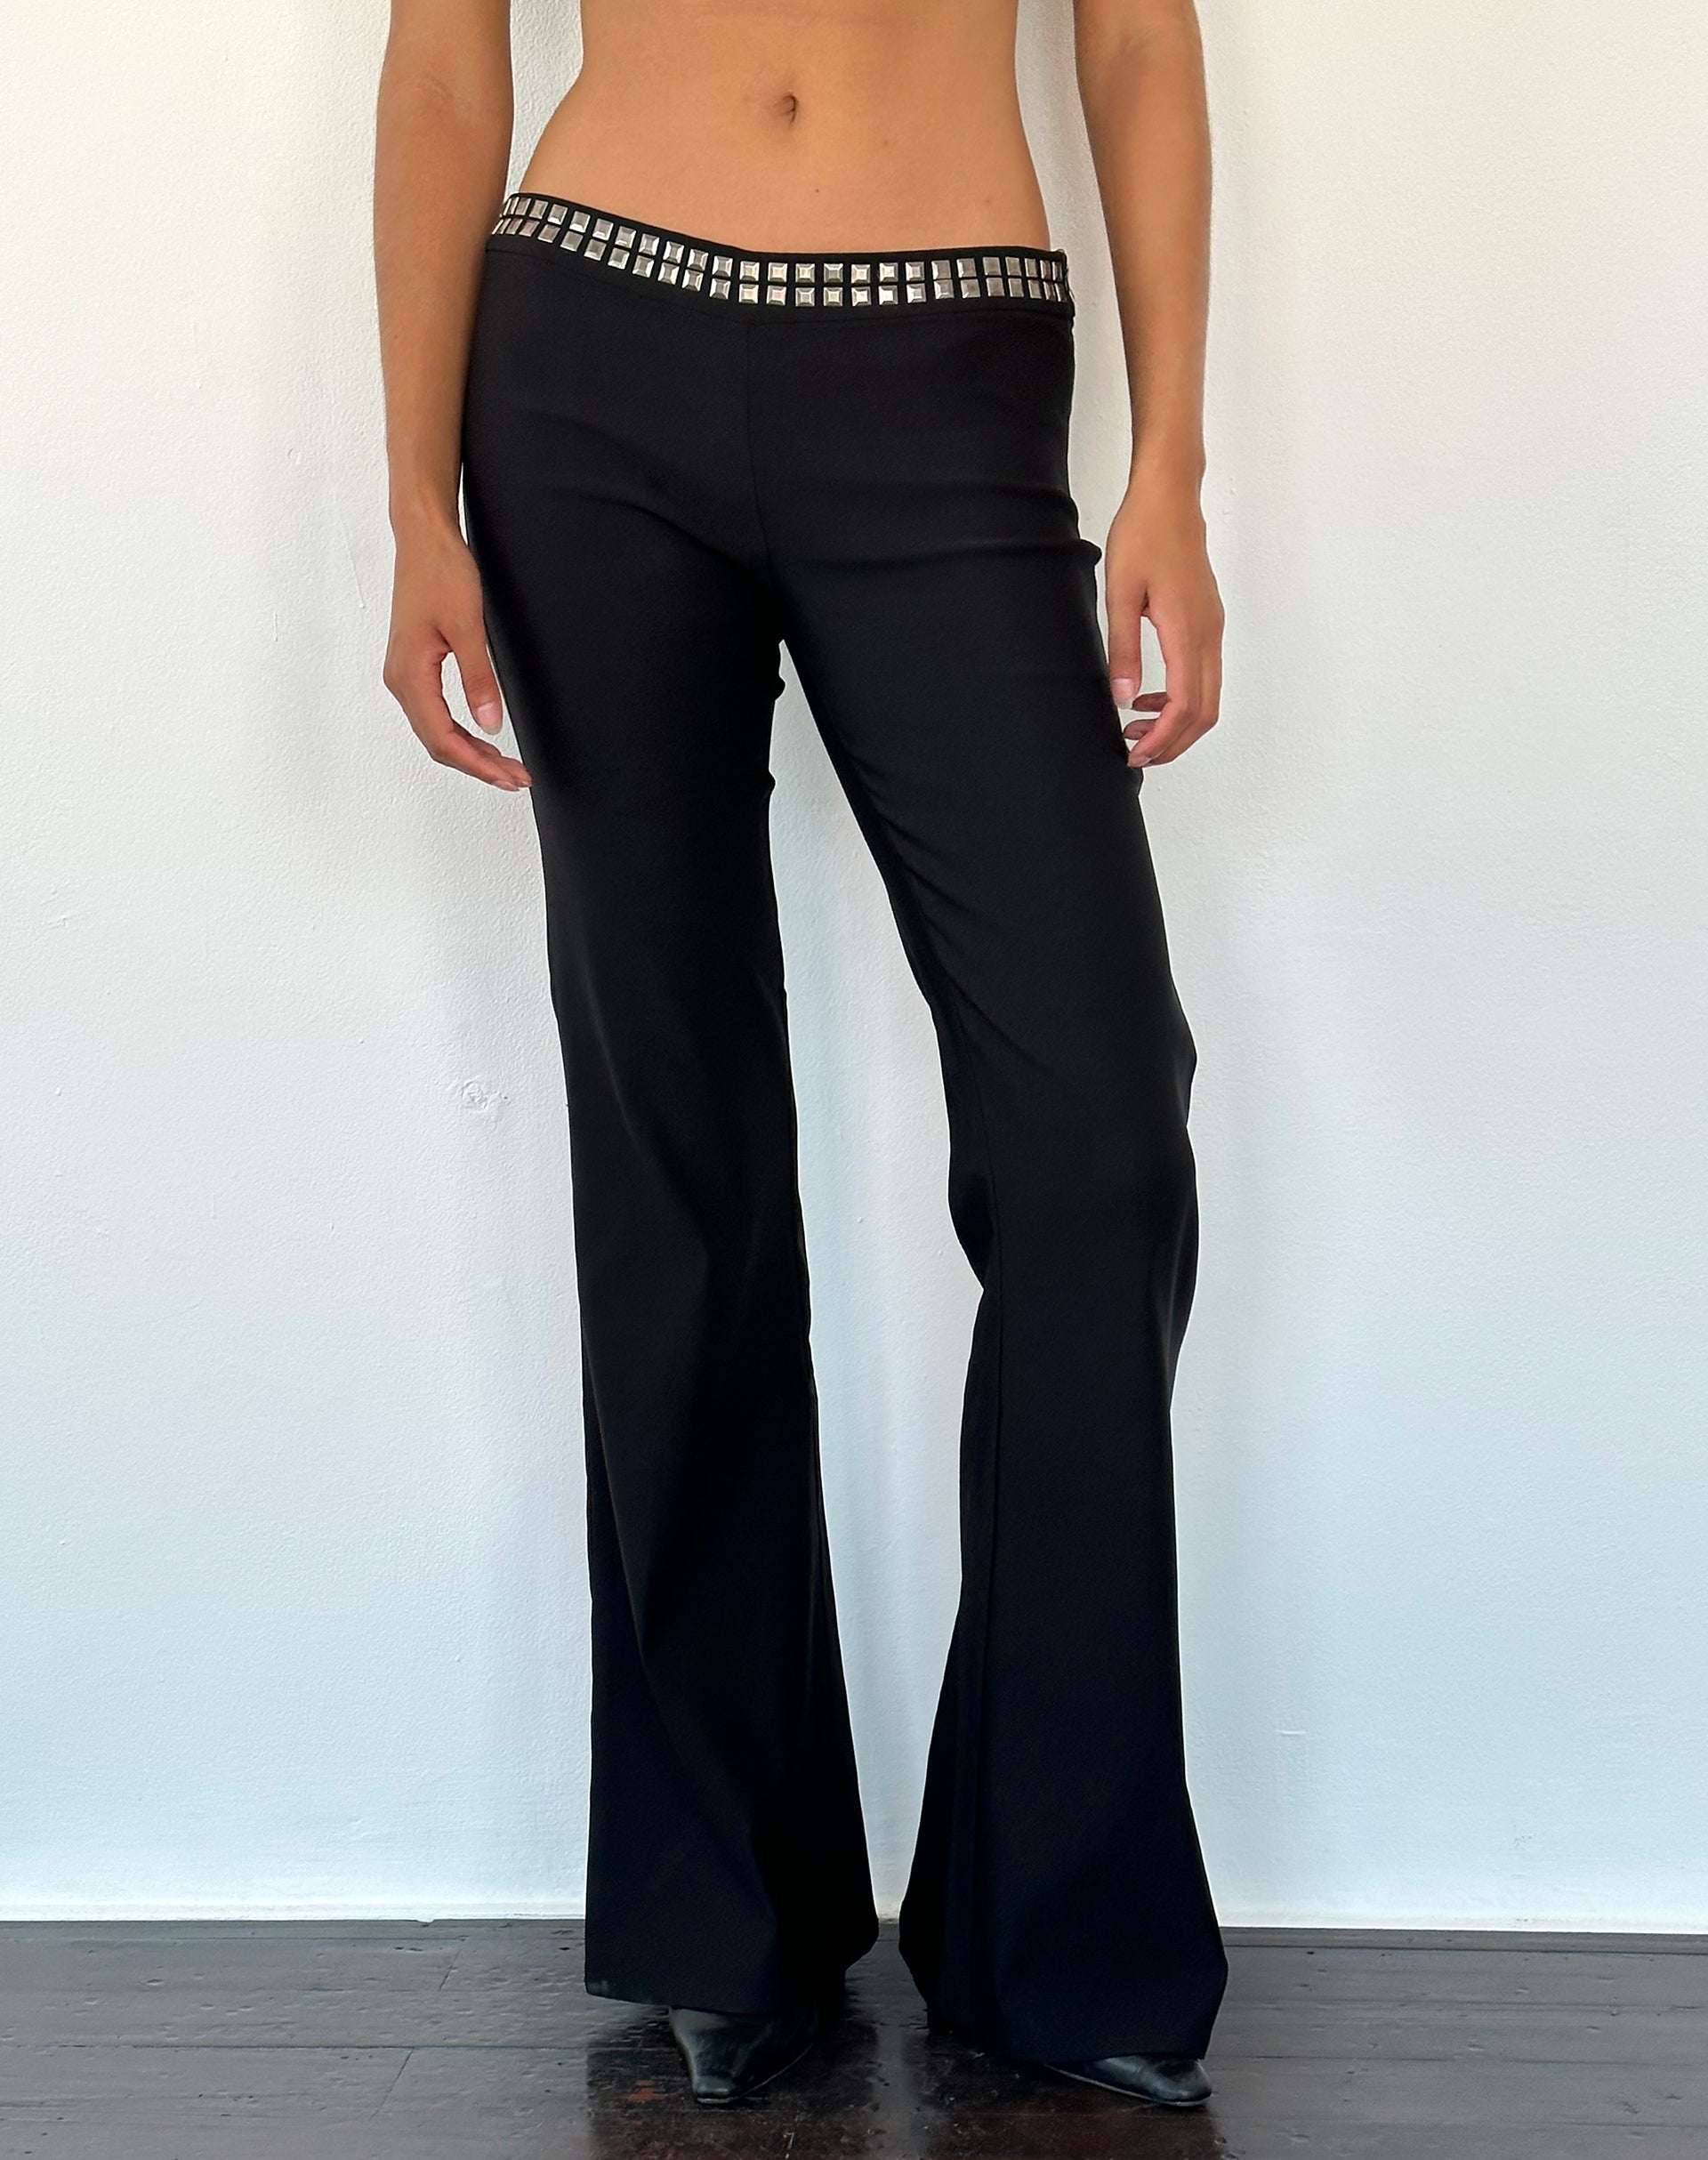 Image of Macias Studded Flared Trousers in Black Tailoring